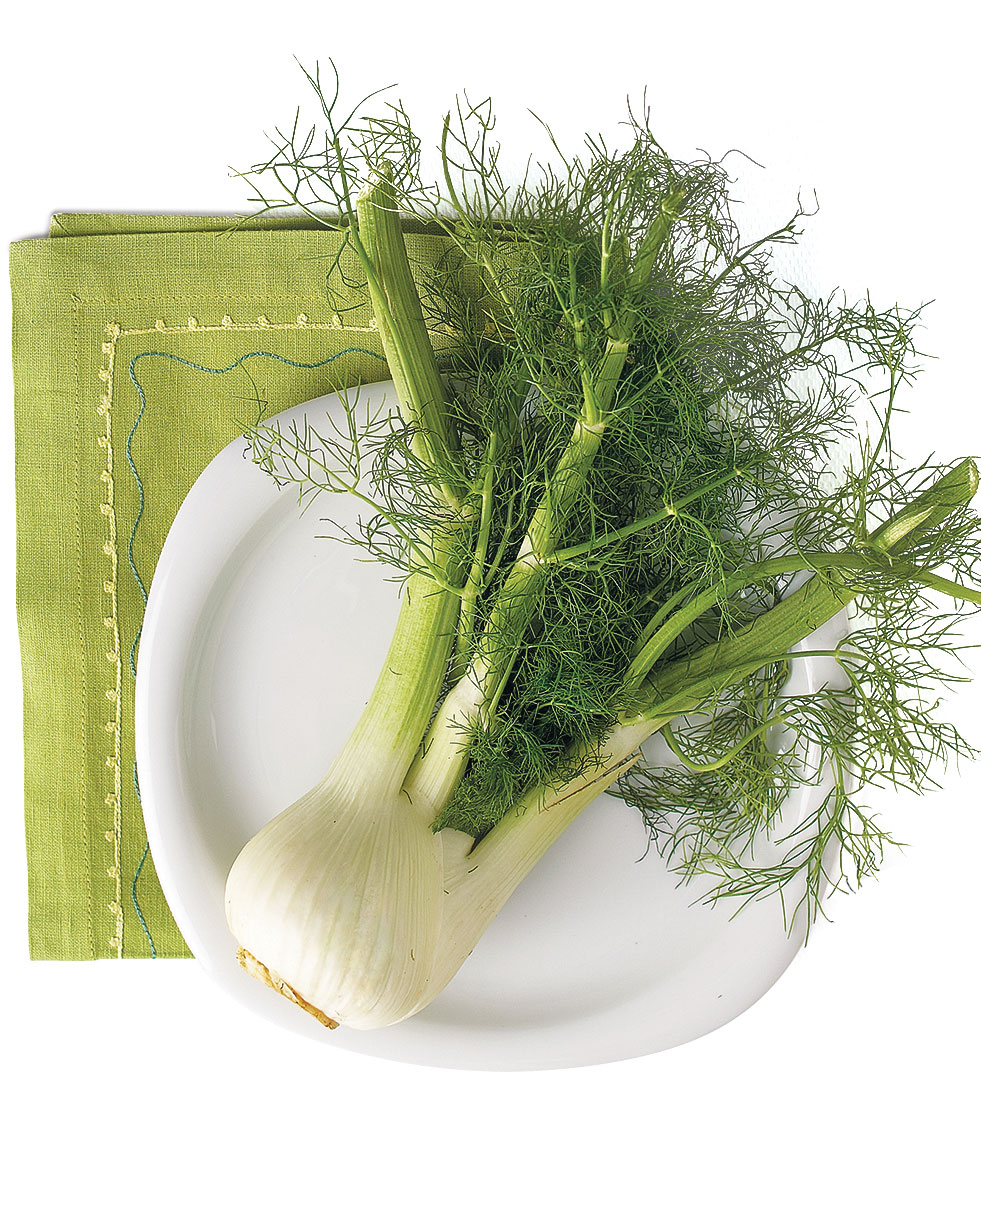 What is fennel? A vegetable or an herb?